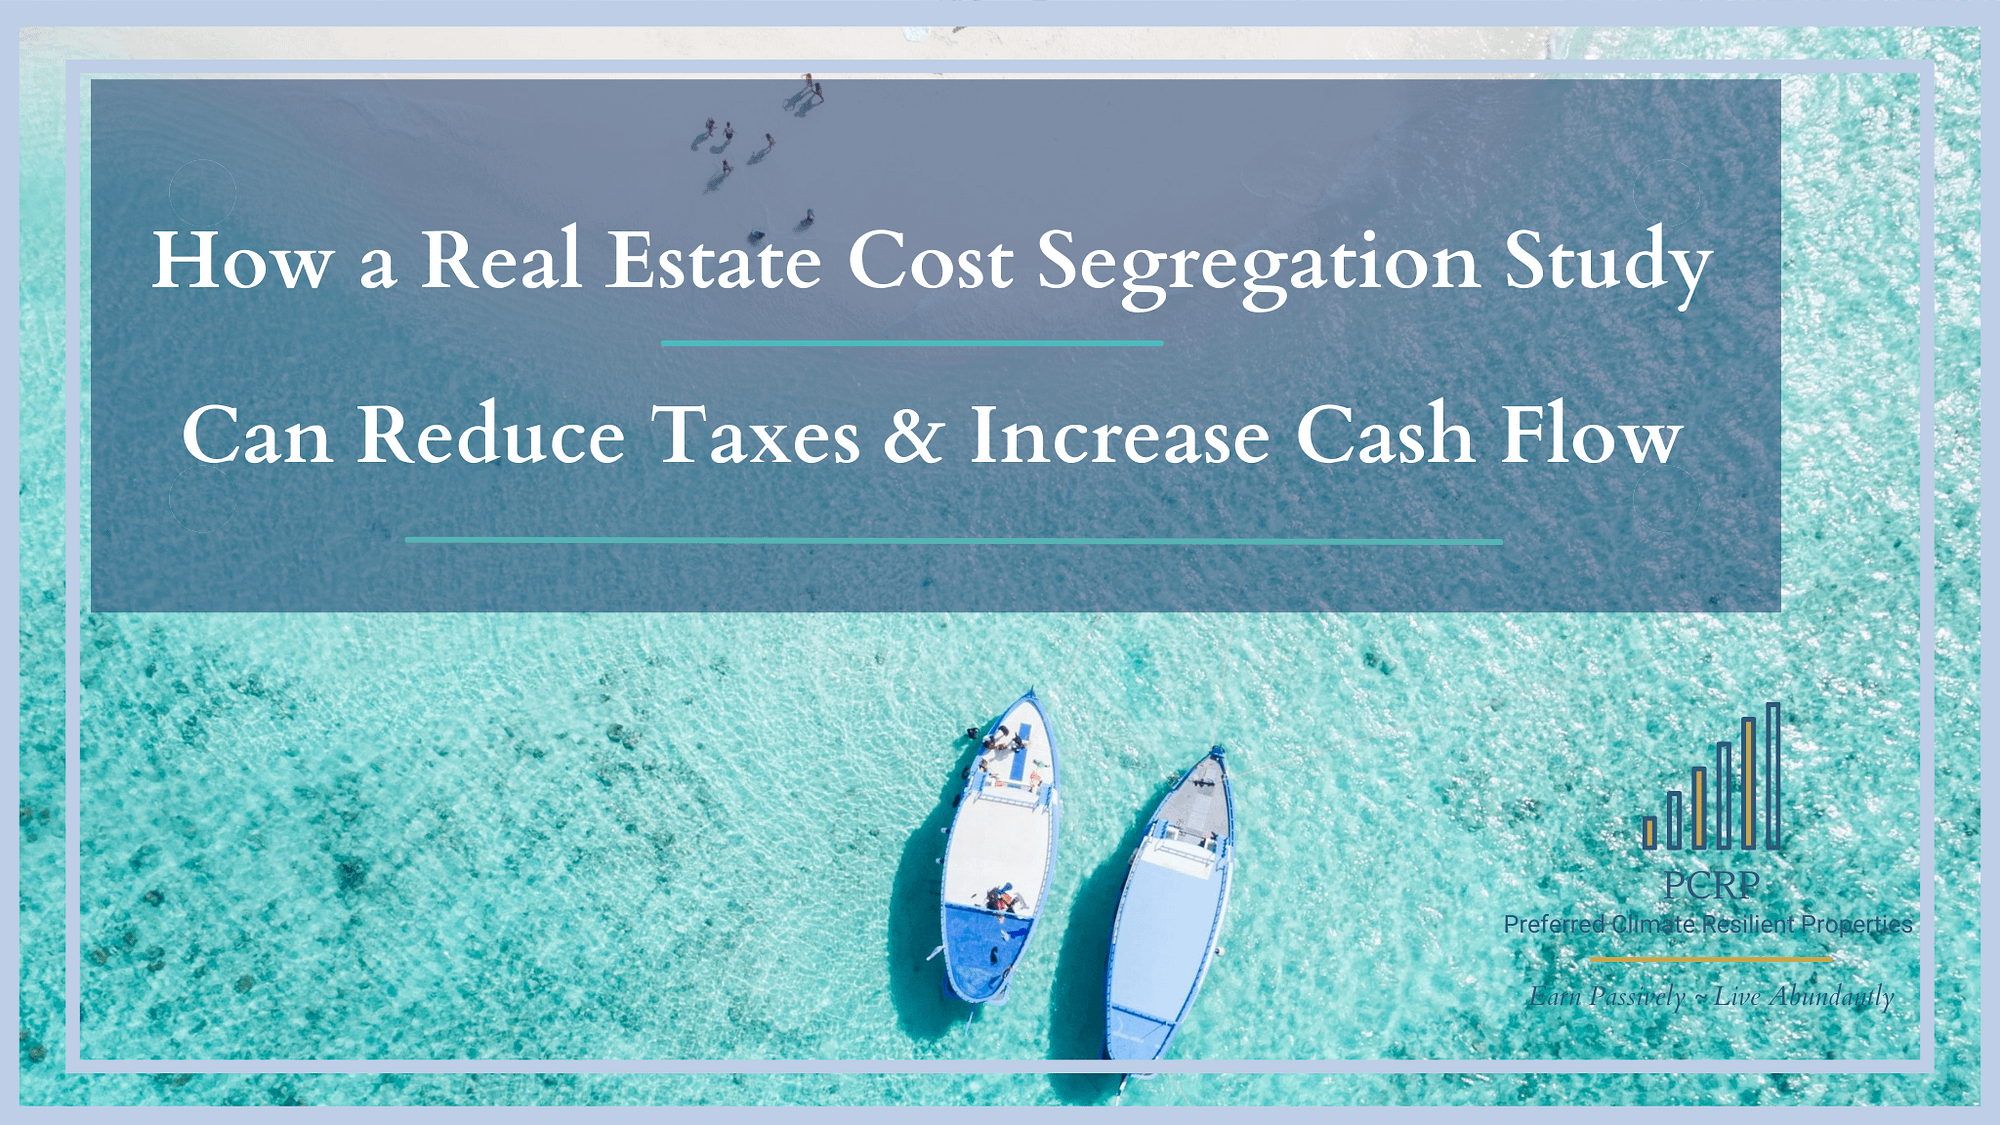 real estate cost segregation study what it is and how it can reduce your taxes and increase your cash flow